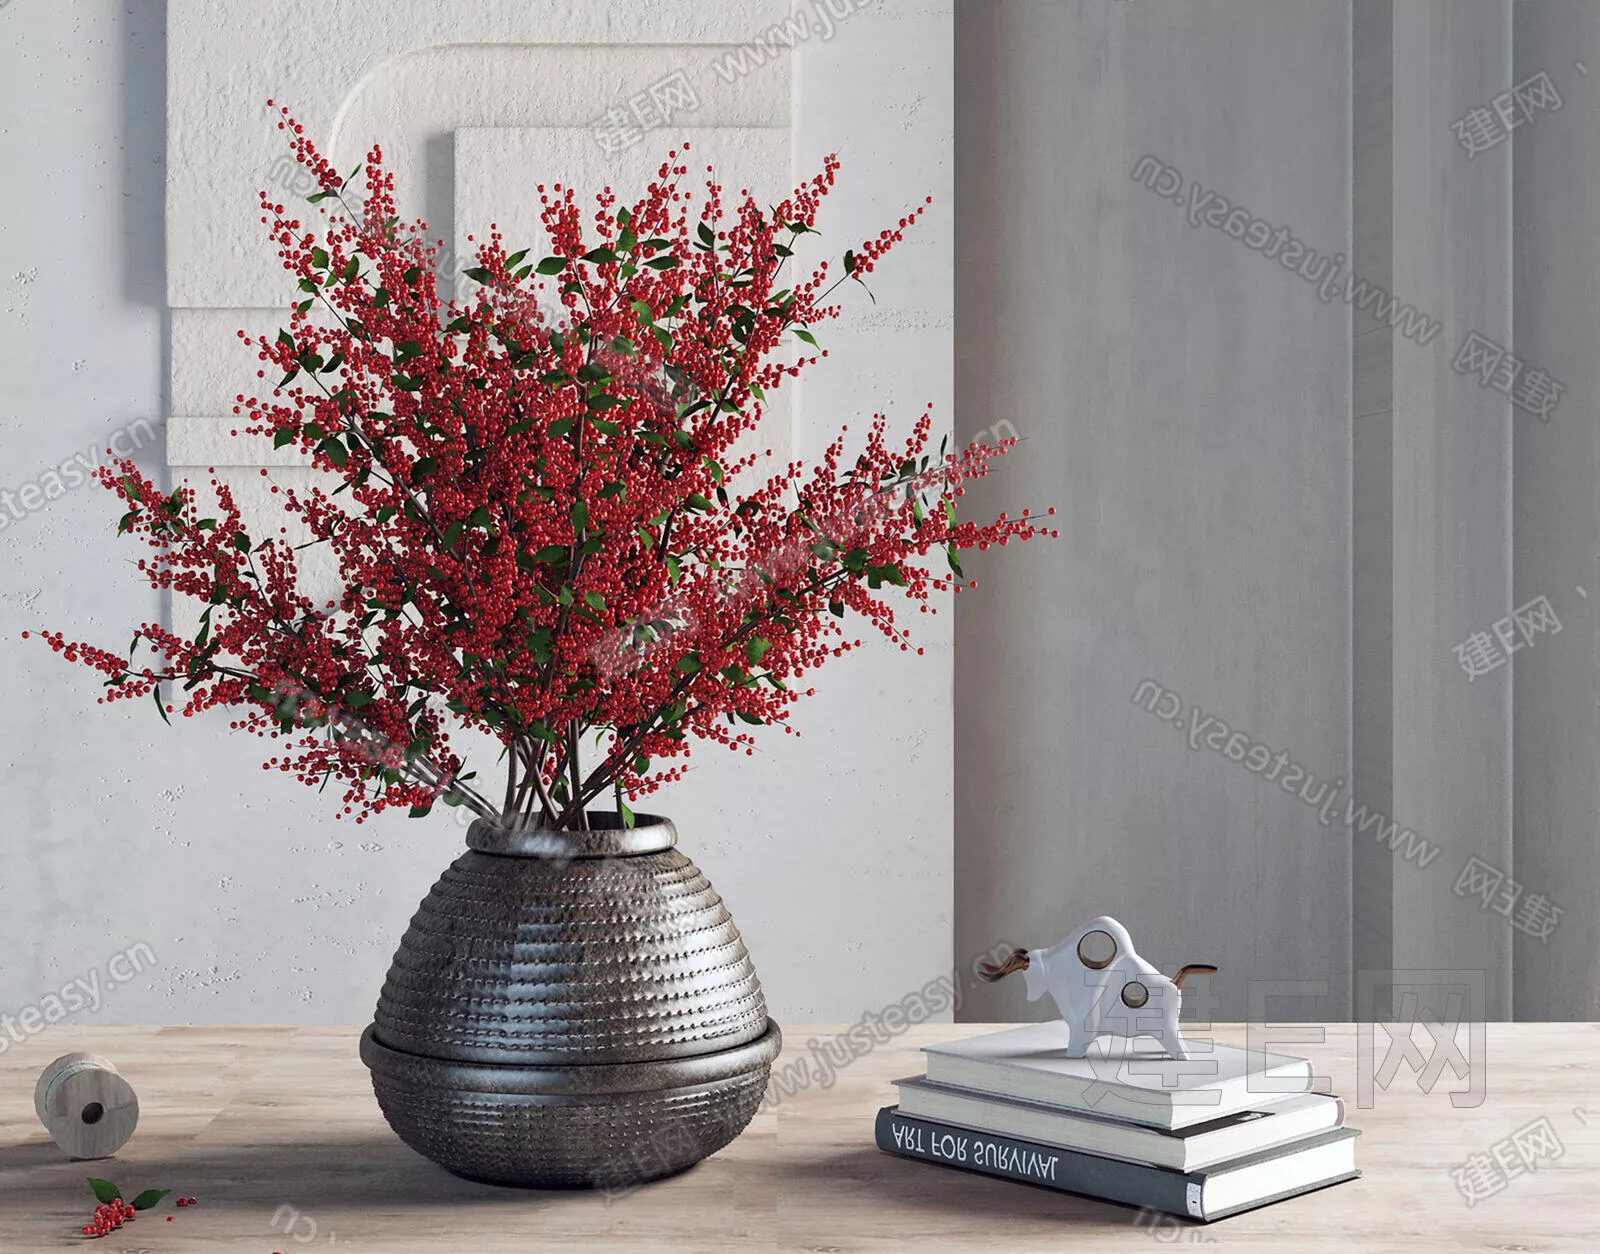 CHINESE FLORAL FLOWERS - SKETCHUP 3D MODEL - VRAY - 107955227